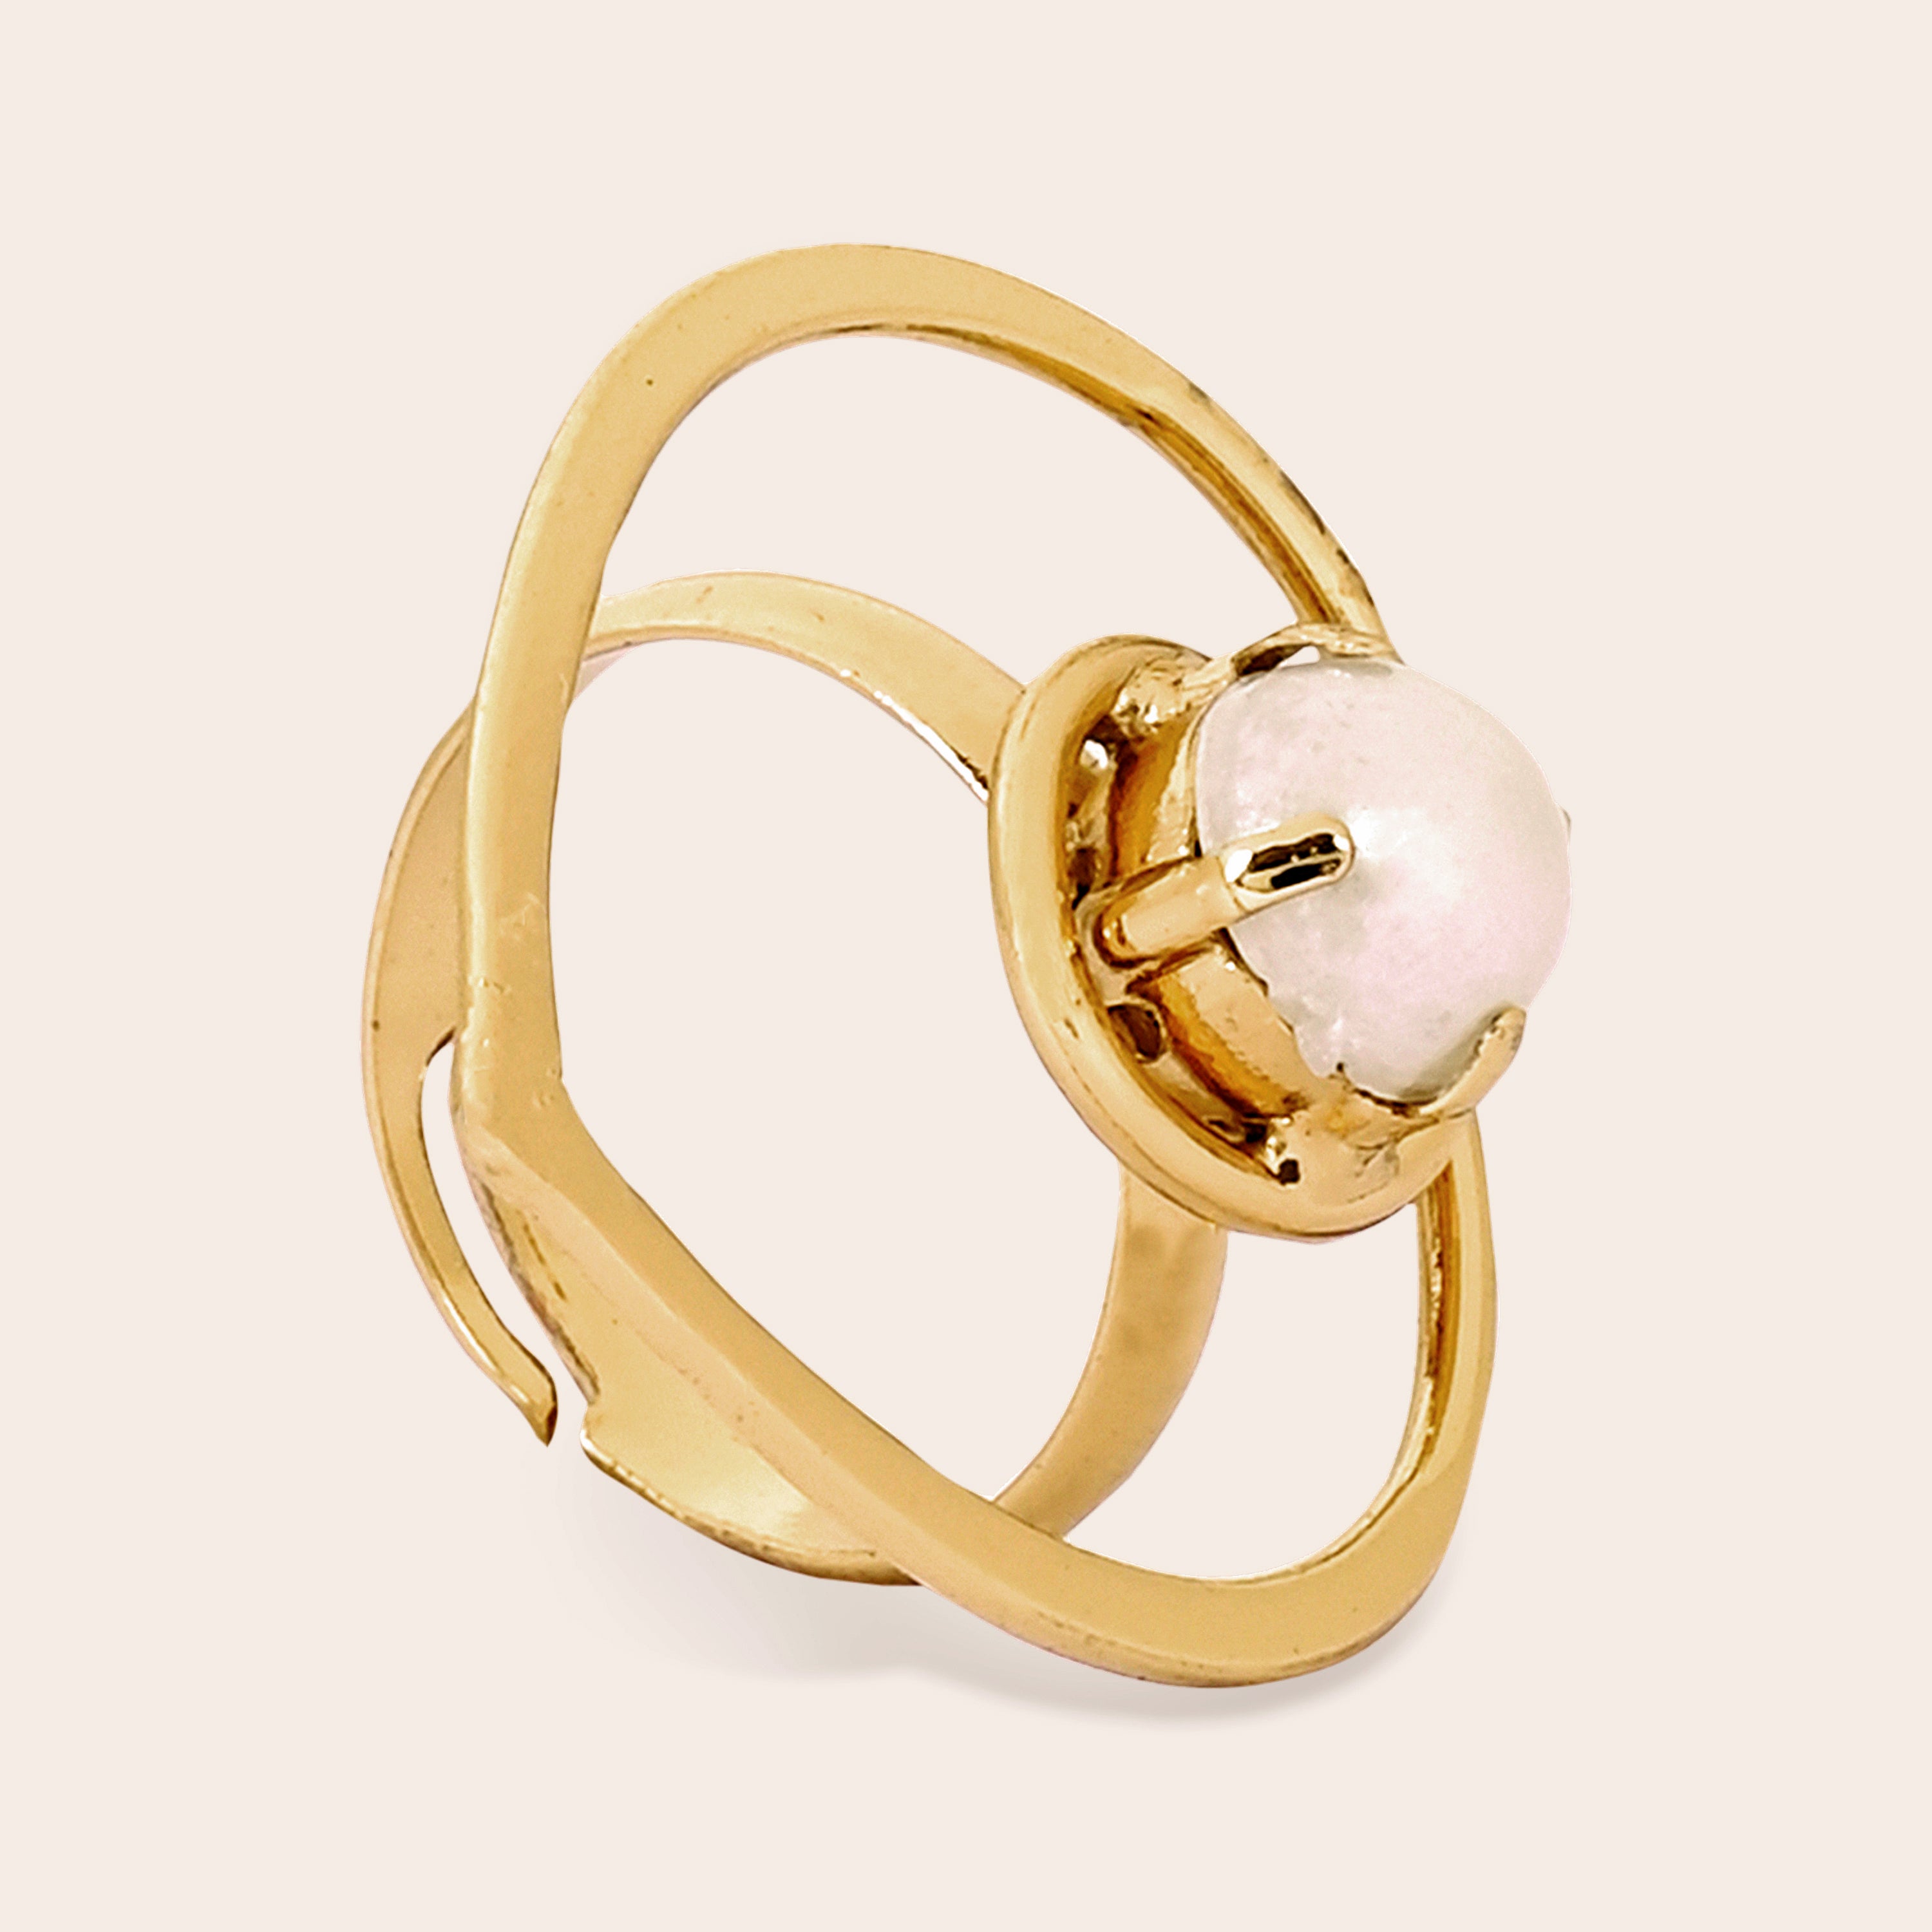 TFC Hearty Love gold plated adjustable ring-Elevate your style with our exquisite collection of gold-plated adjustable rings for women, including timeless signet rings. Explore cheapest fashion jewellery designs with anti-tarnish properties, all at The Fun Company with a touch of elegance